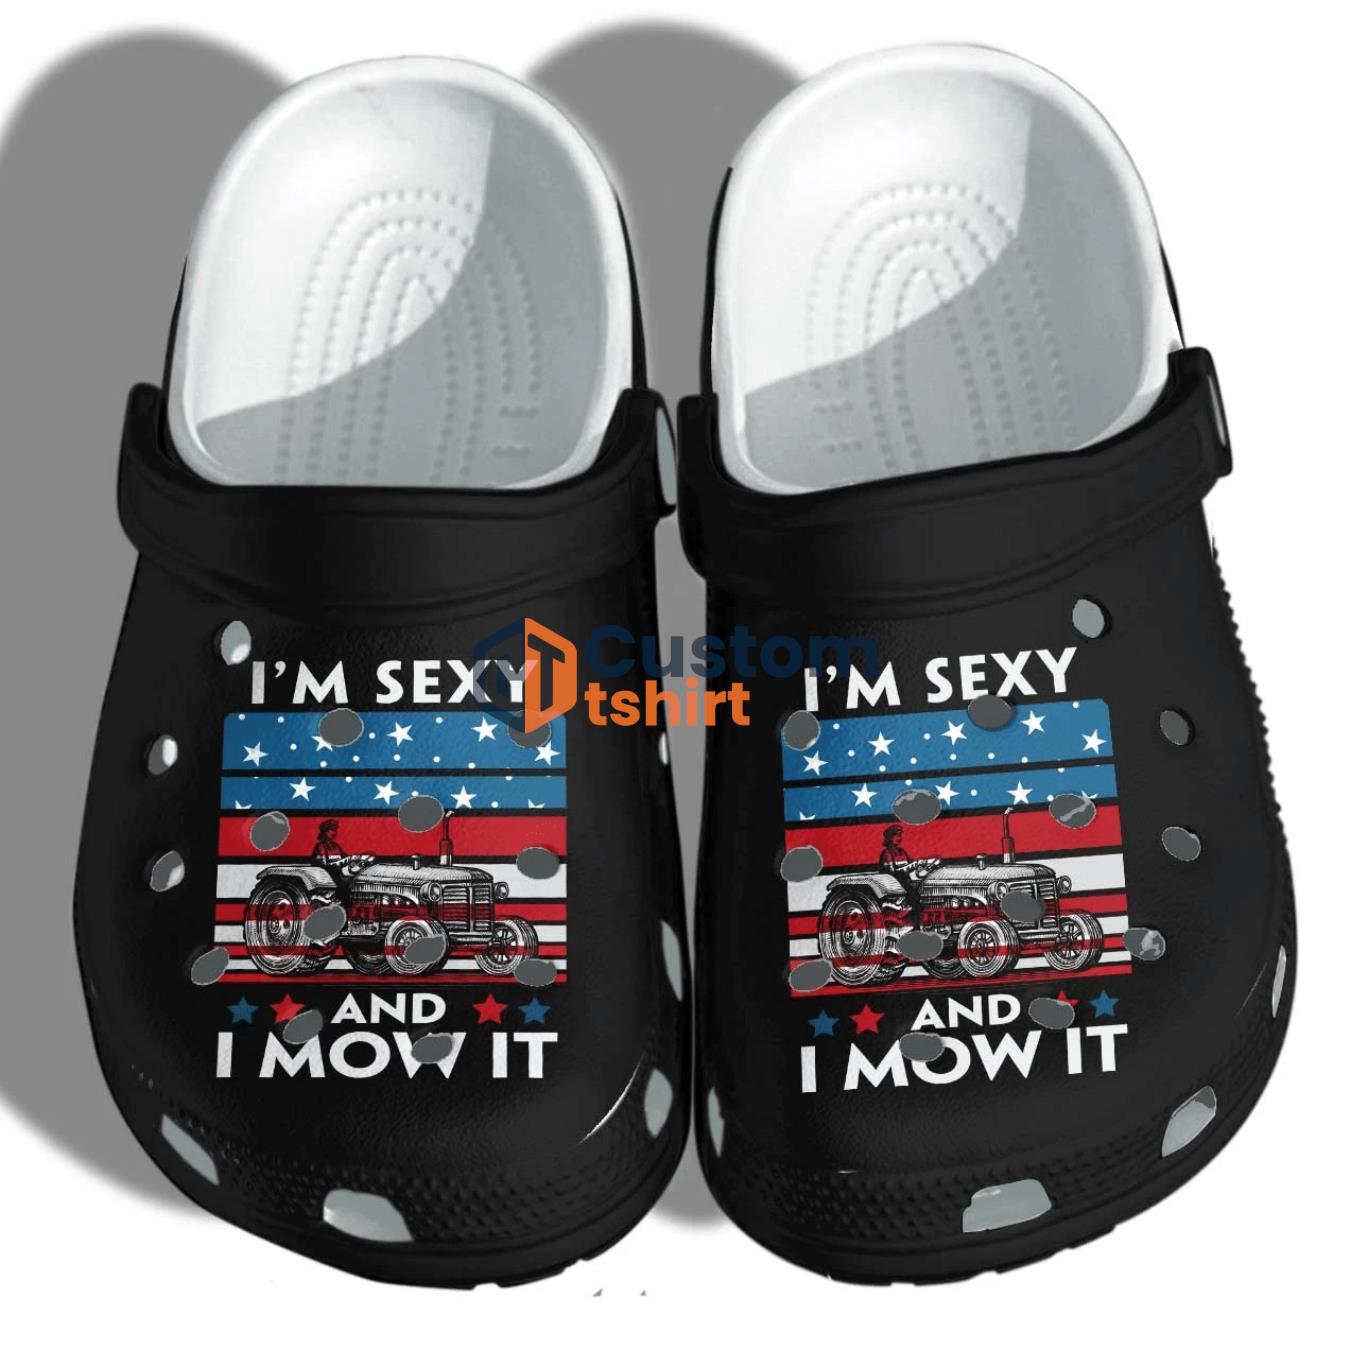 Mow Clog Shoes Garden Funny - Im Sexy And I Mow It Funny Clog Shoes Gifts Men Women Product Photo 1 Product photo 1